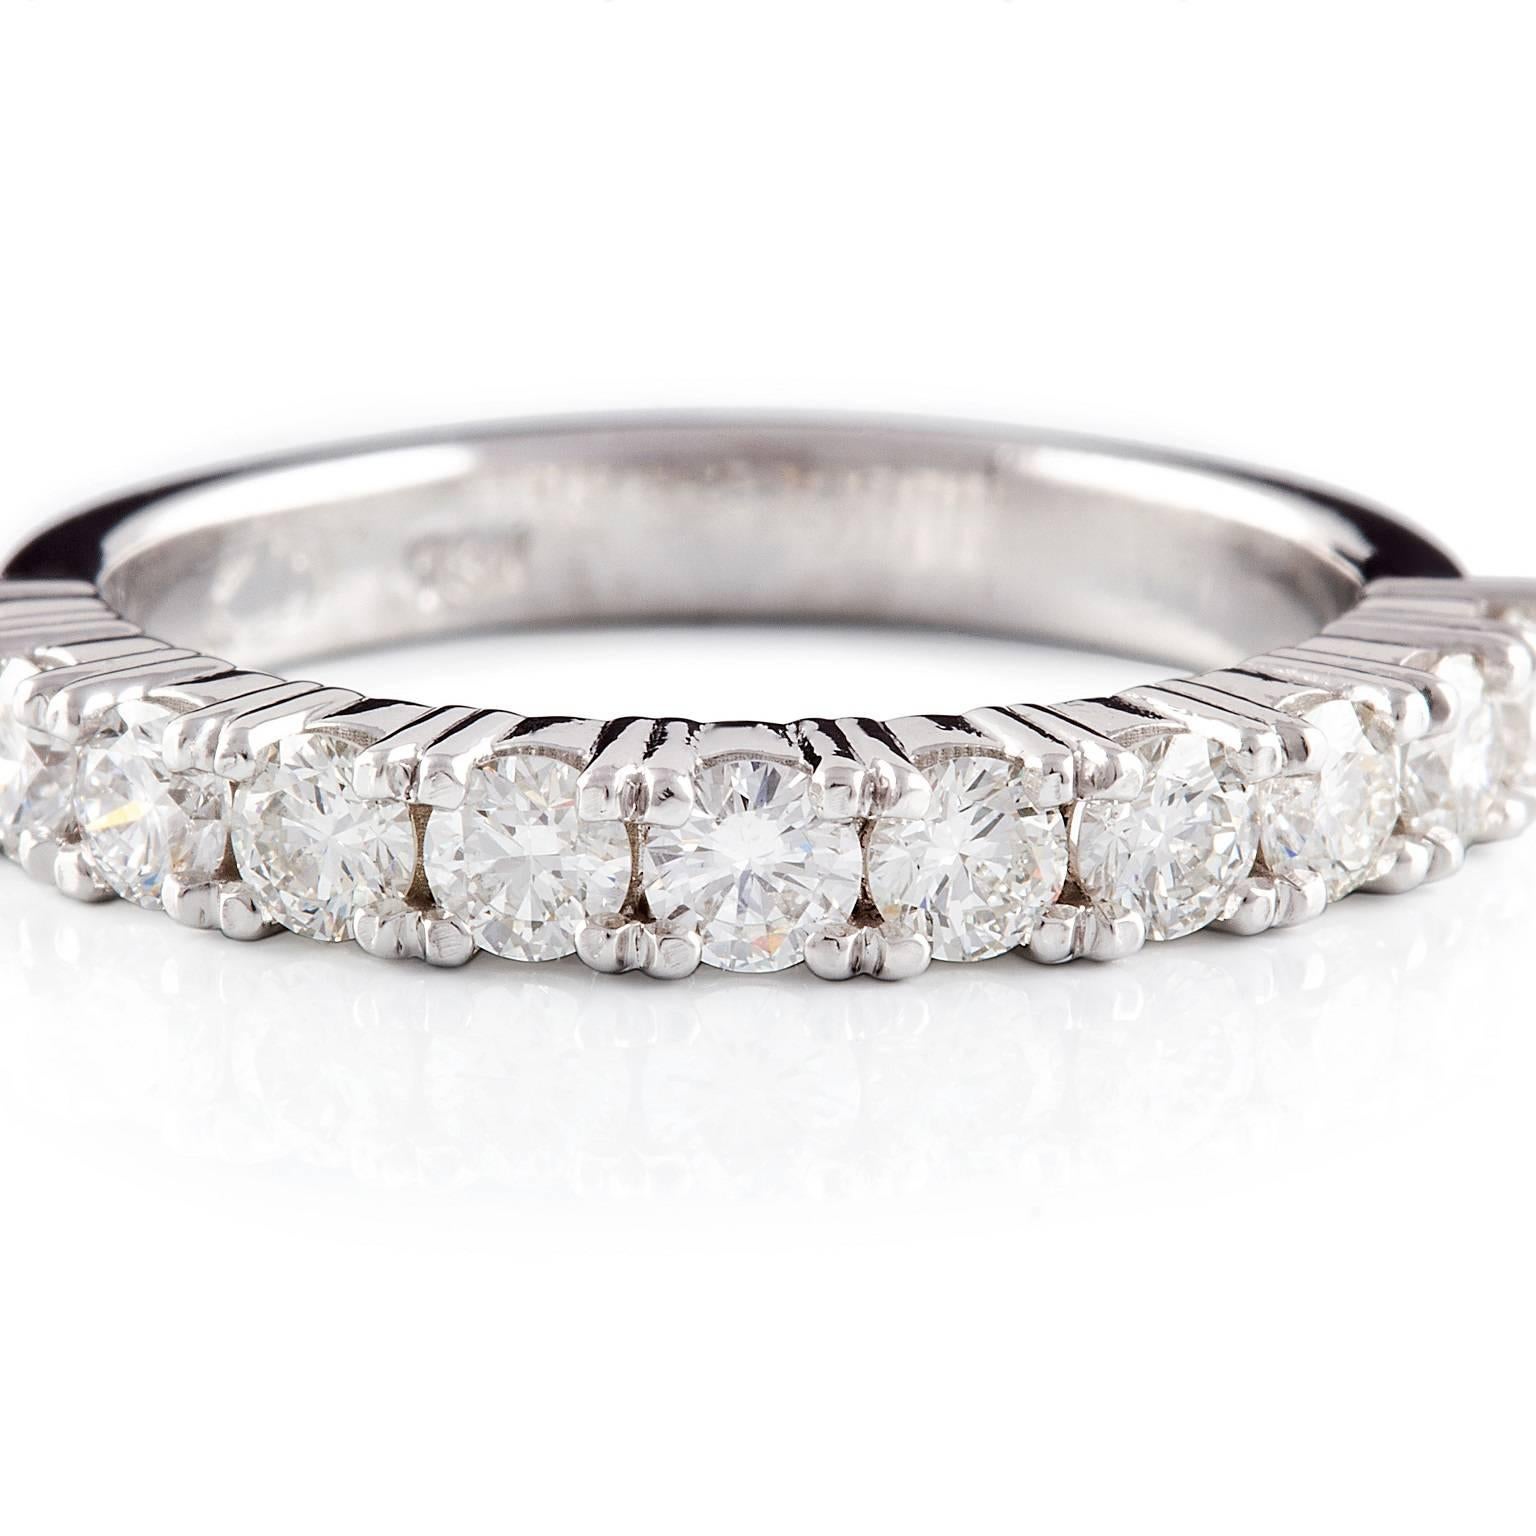 Bianca Band

Set with eleven beautiful diamonds, this lovely band is well suited as a dress, wedding or other special commitment ring.

Round brilliant cut diamonds: G colour, VS clarity, 2.90-3.23mm, 11 = 1.05ct total weight

Weight: 5.10g

About